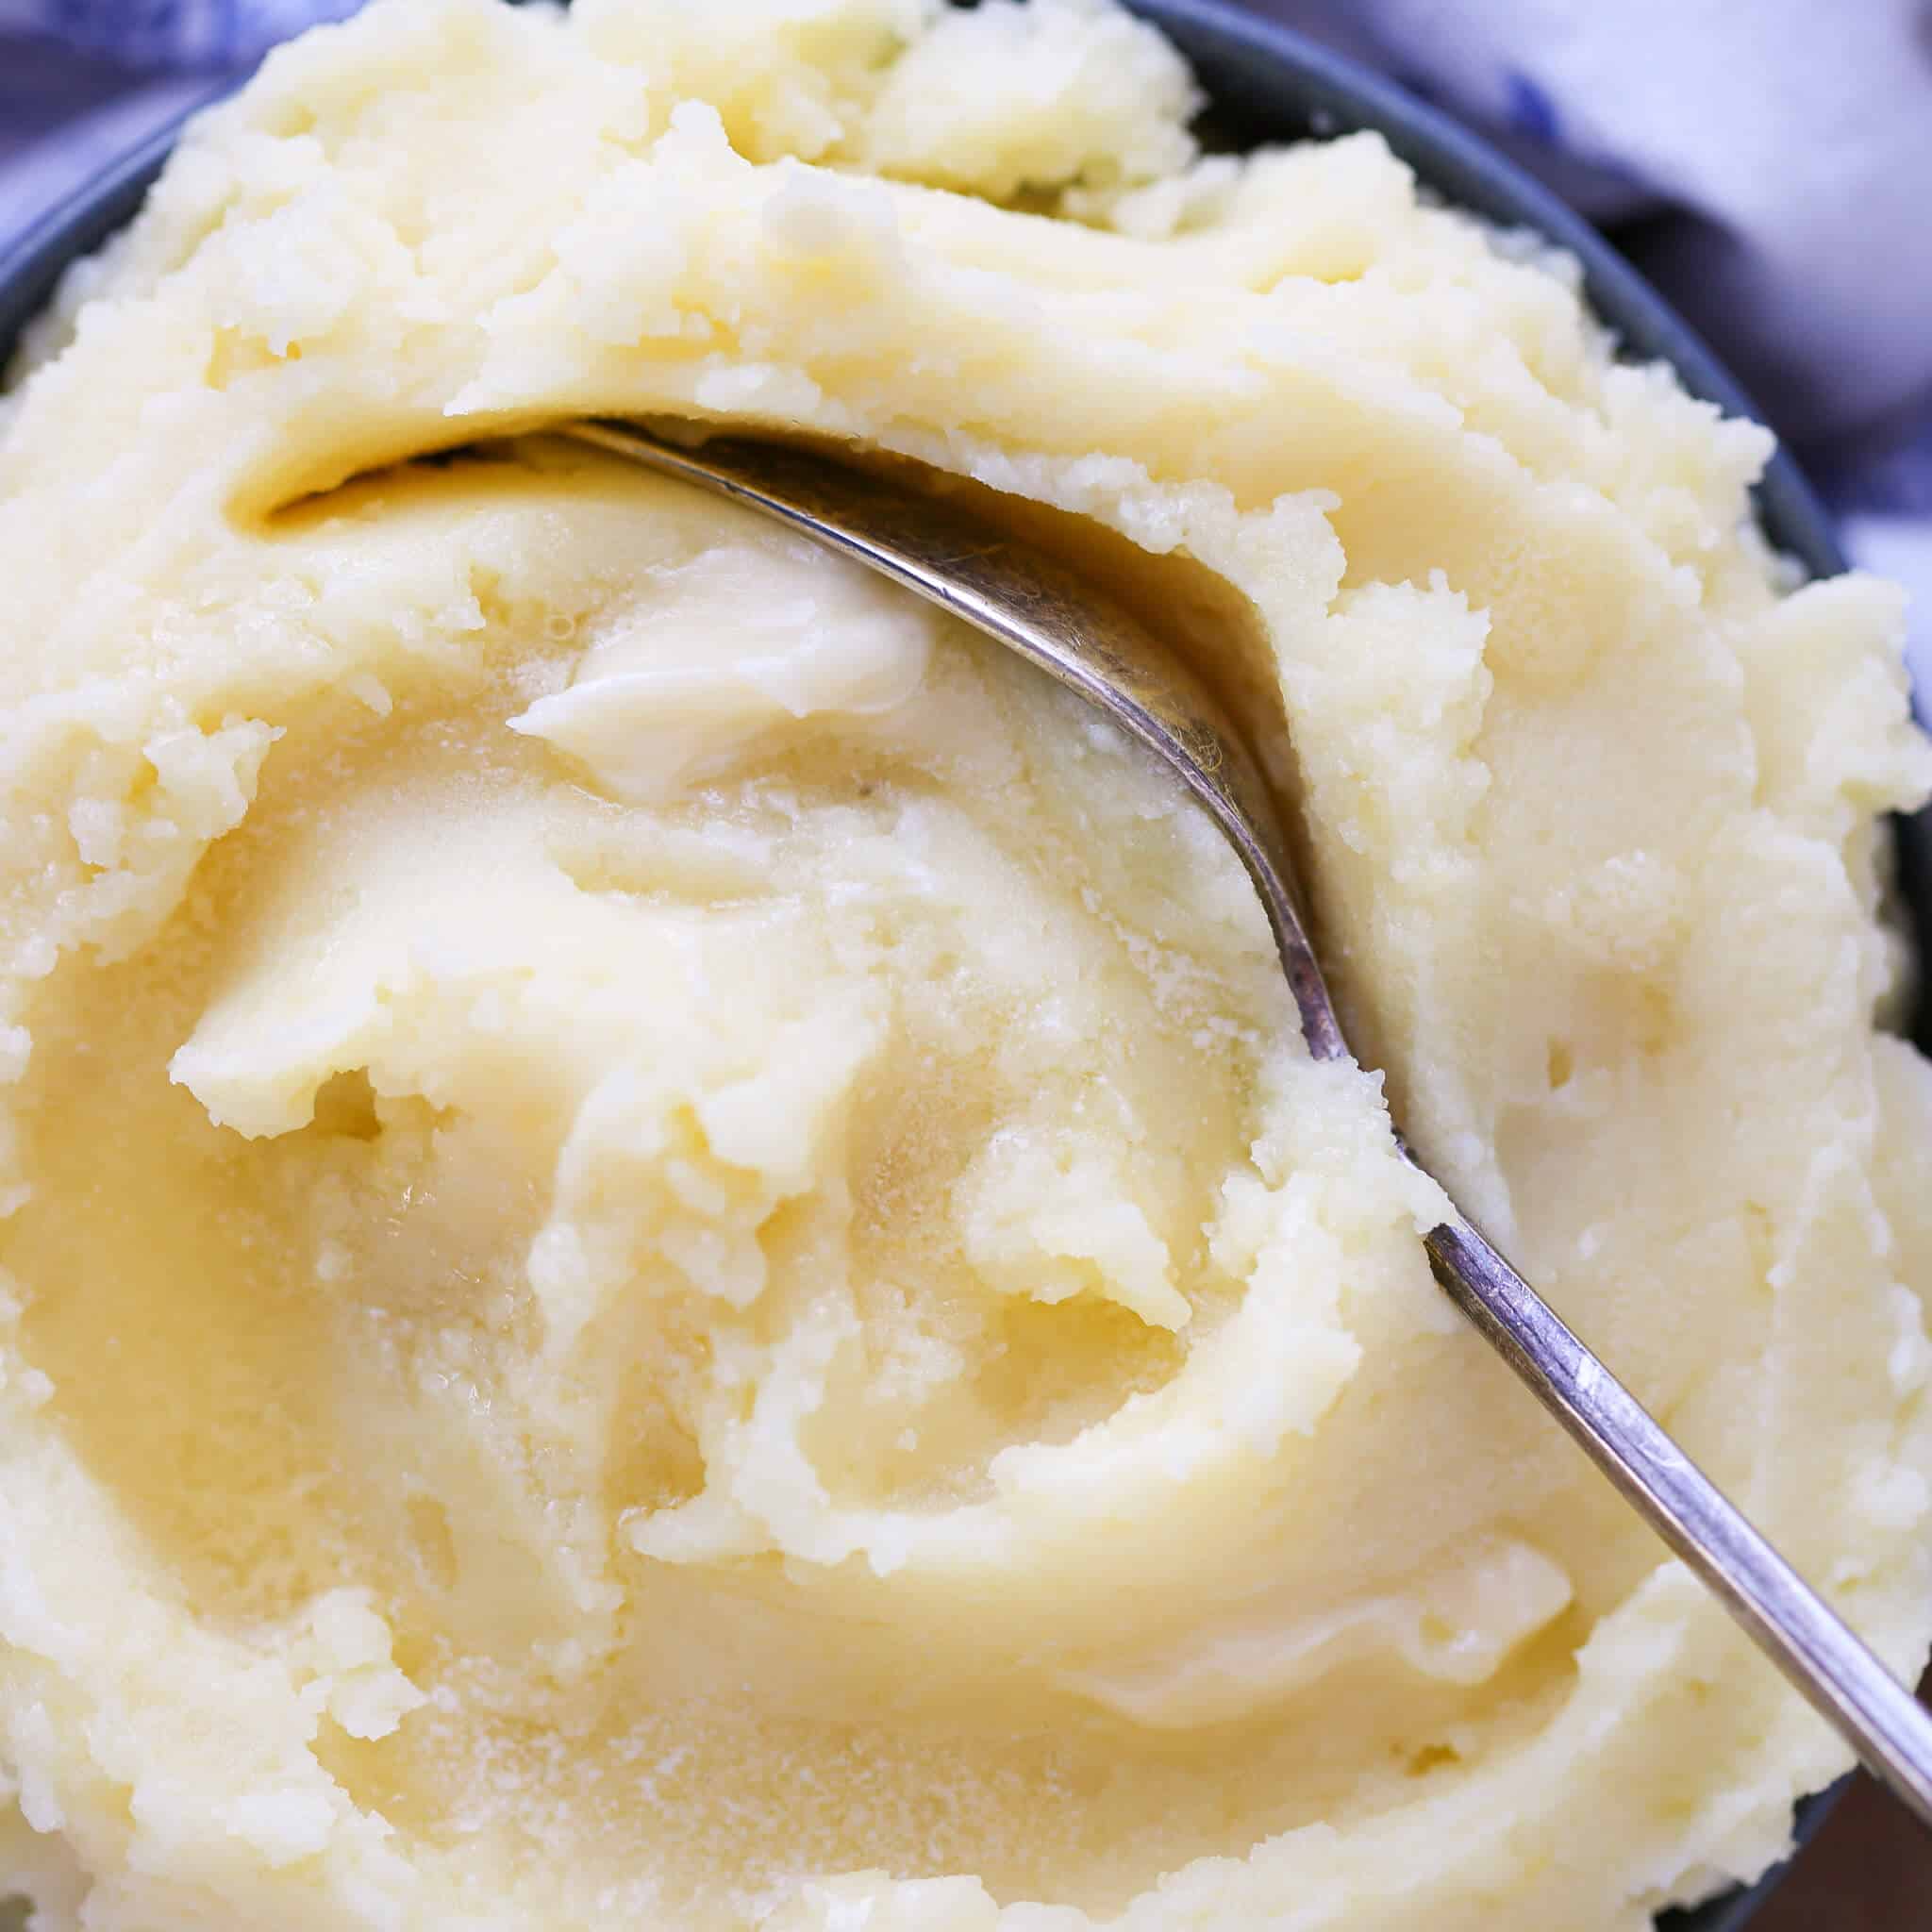 Creamy Mashed Potatoes Recipe with vintage spoon